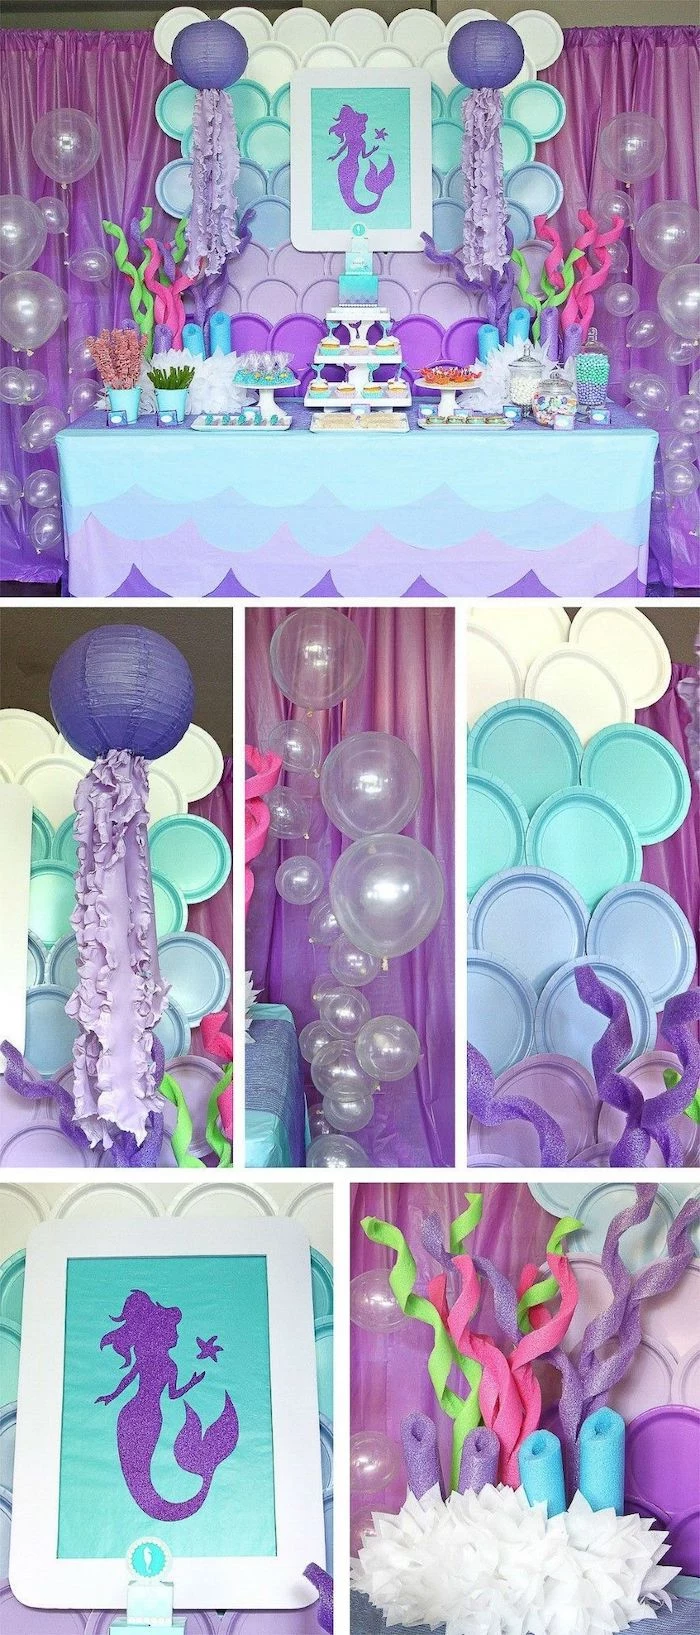 mermaid theme, baby shower centerpieces, purple and turquoise decor, dessert table, transparent balloons